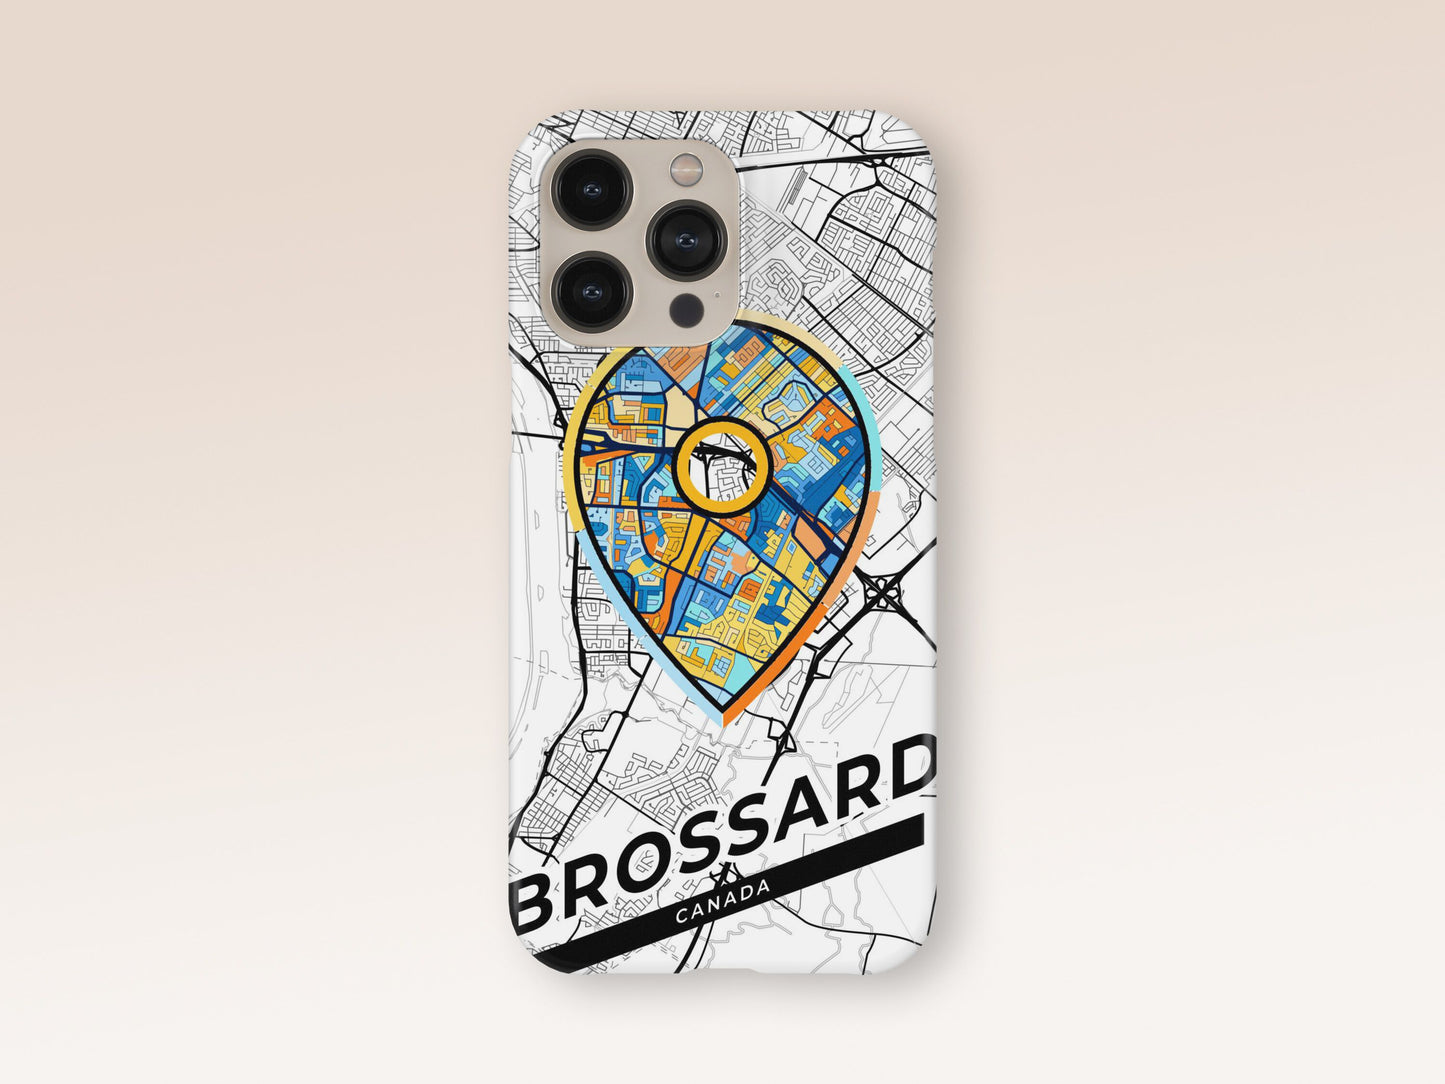 Brossard Canada slim phone case with colorful icon. Birthday, wedding or housewarming gift. Couple match cases. 1